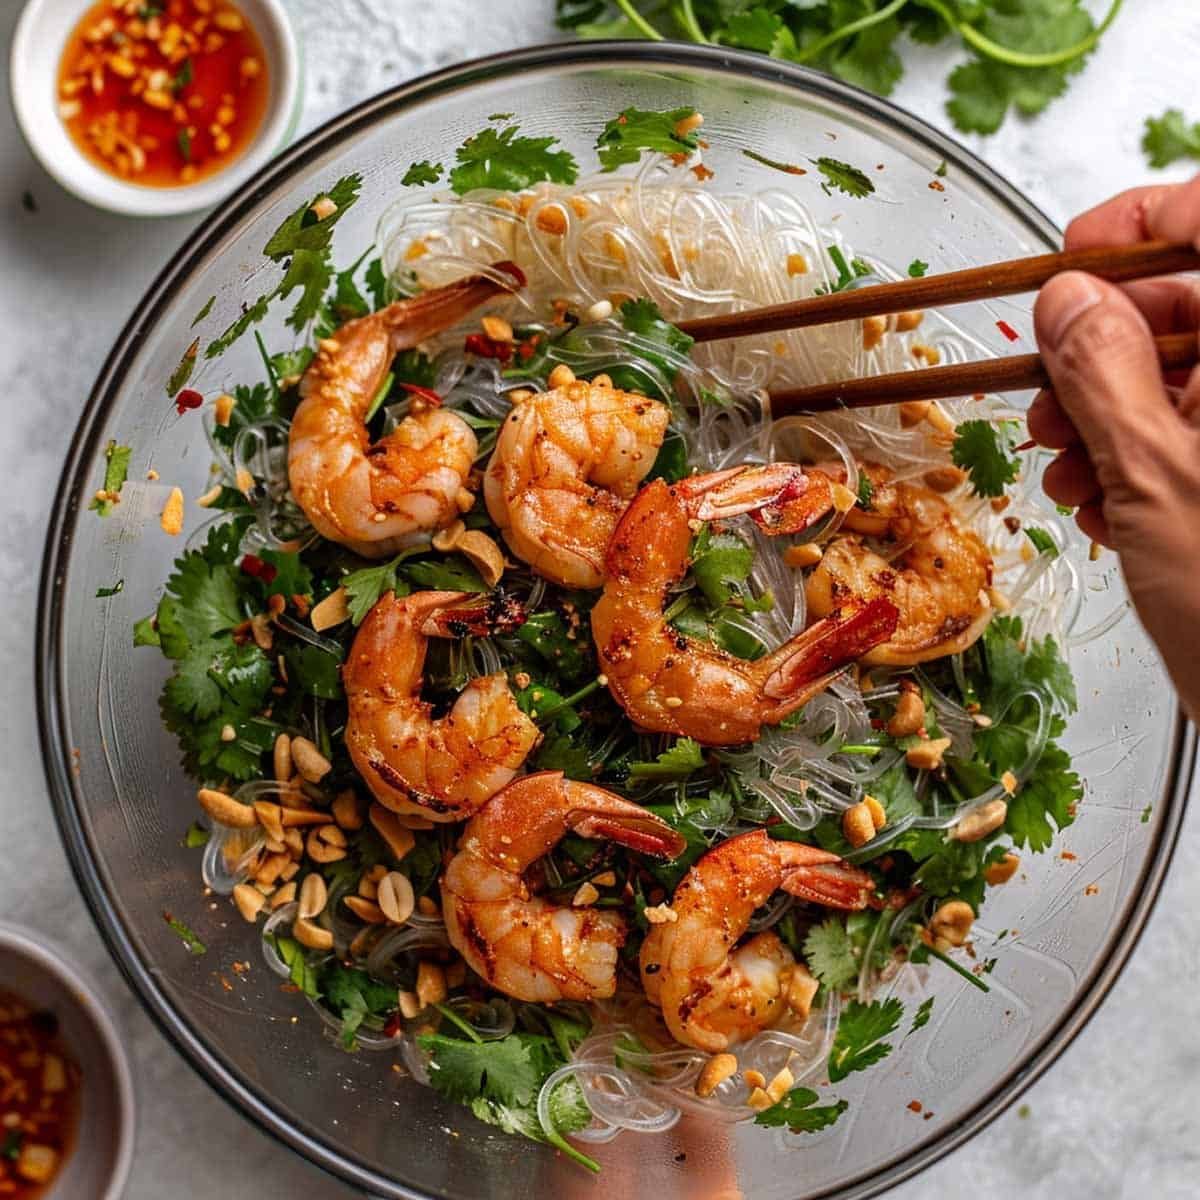 Combining glass noodles, shrimp, and vegetables to make a delicious Yum Woon Sen dish.